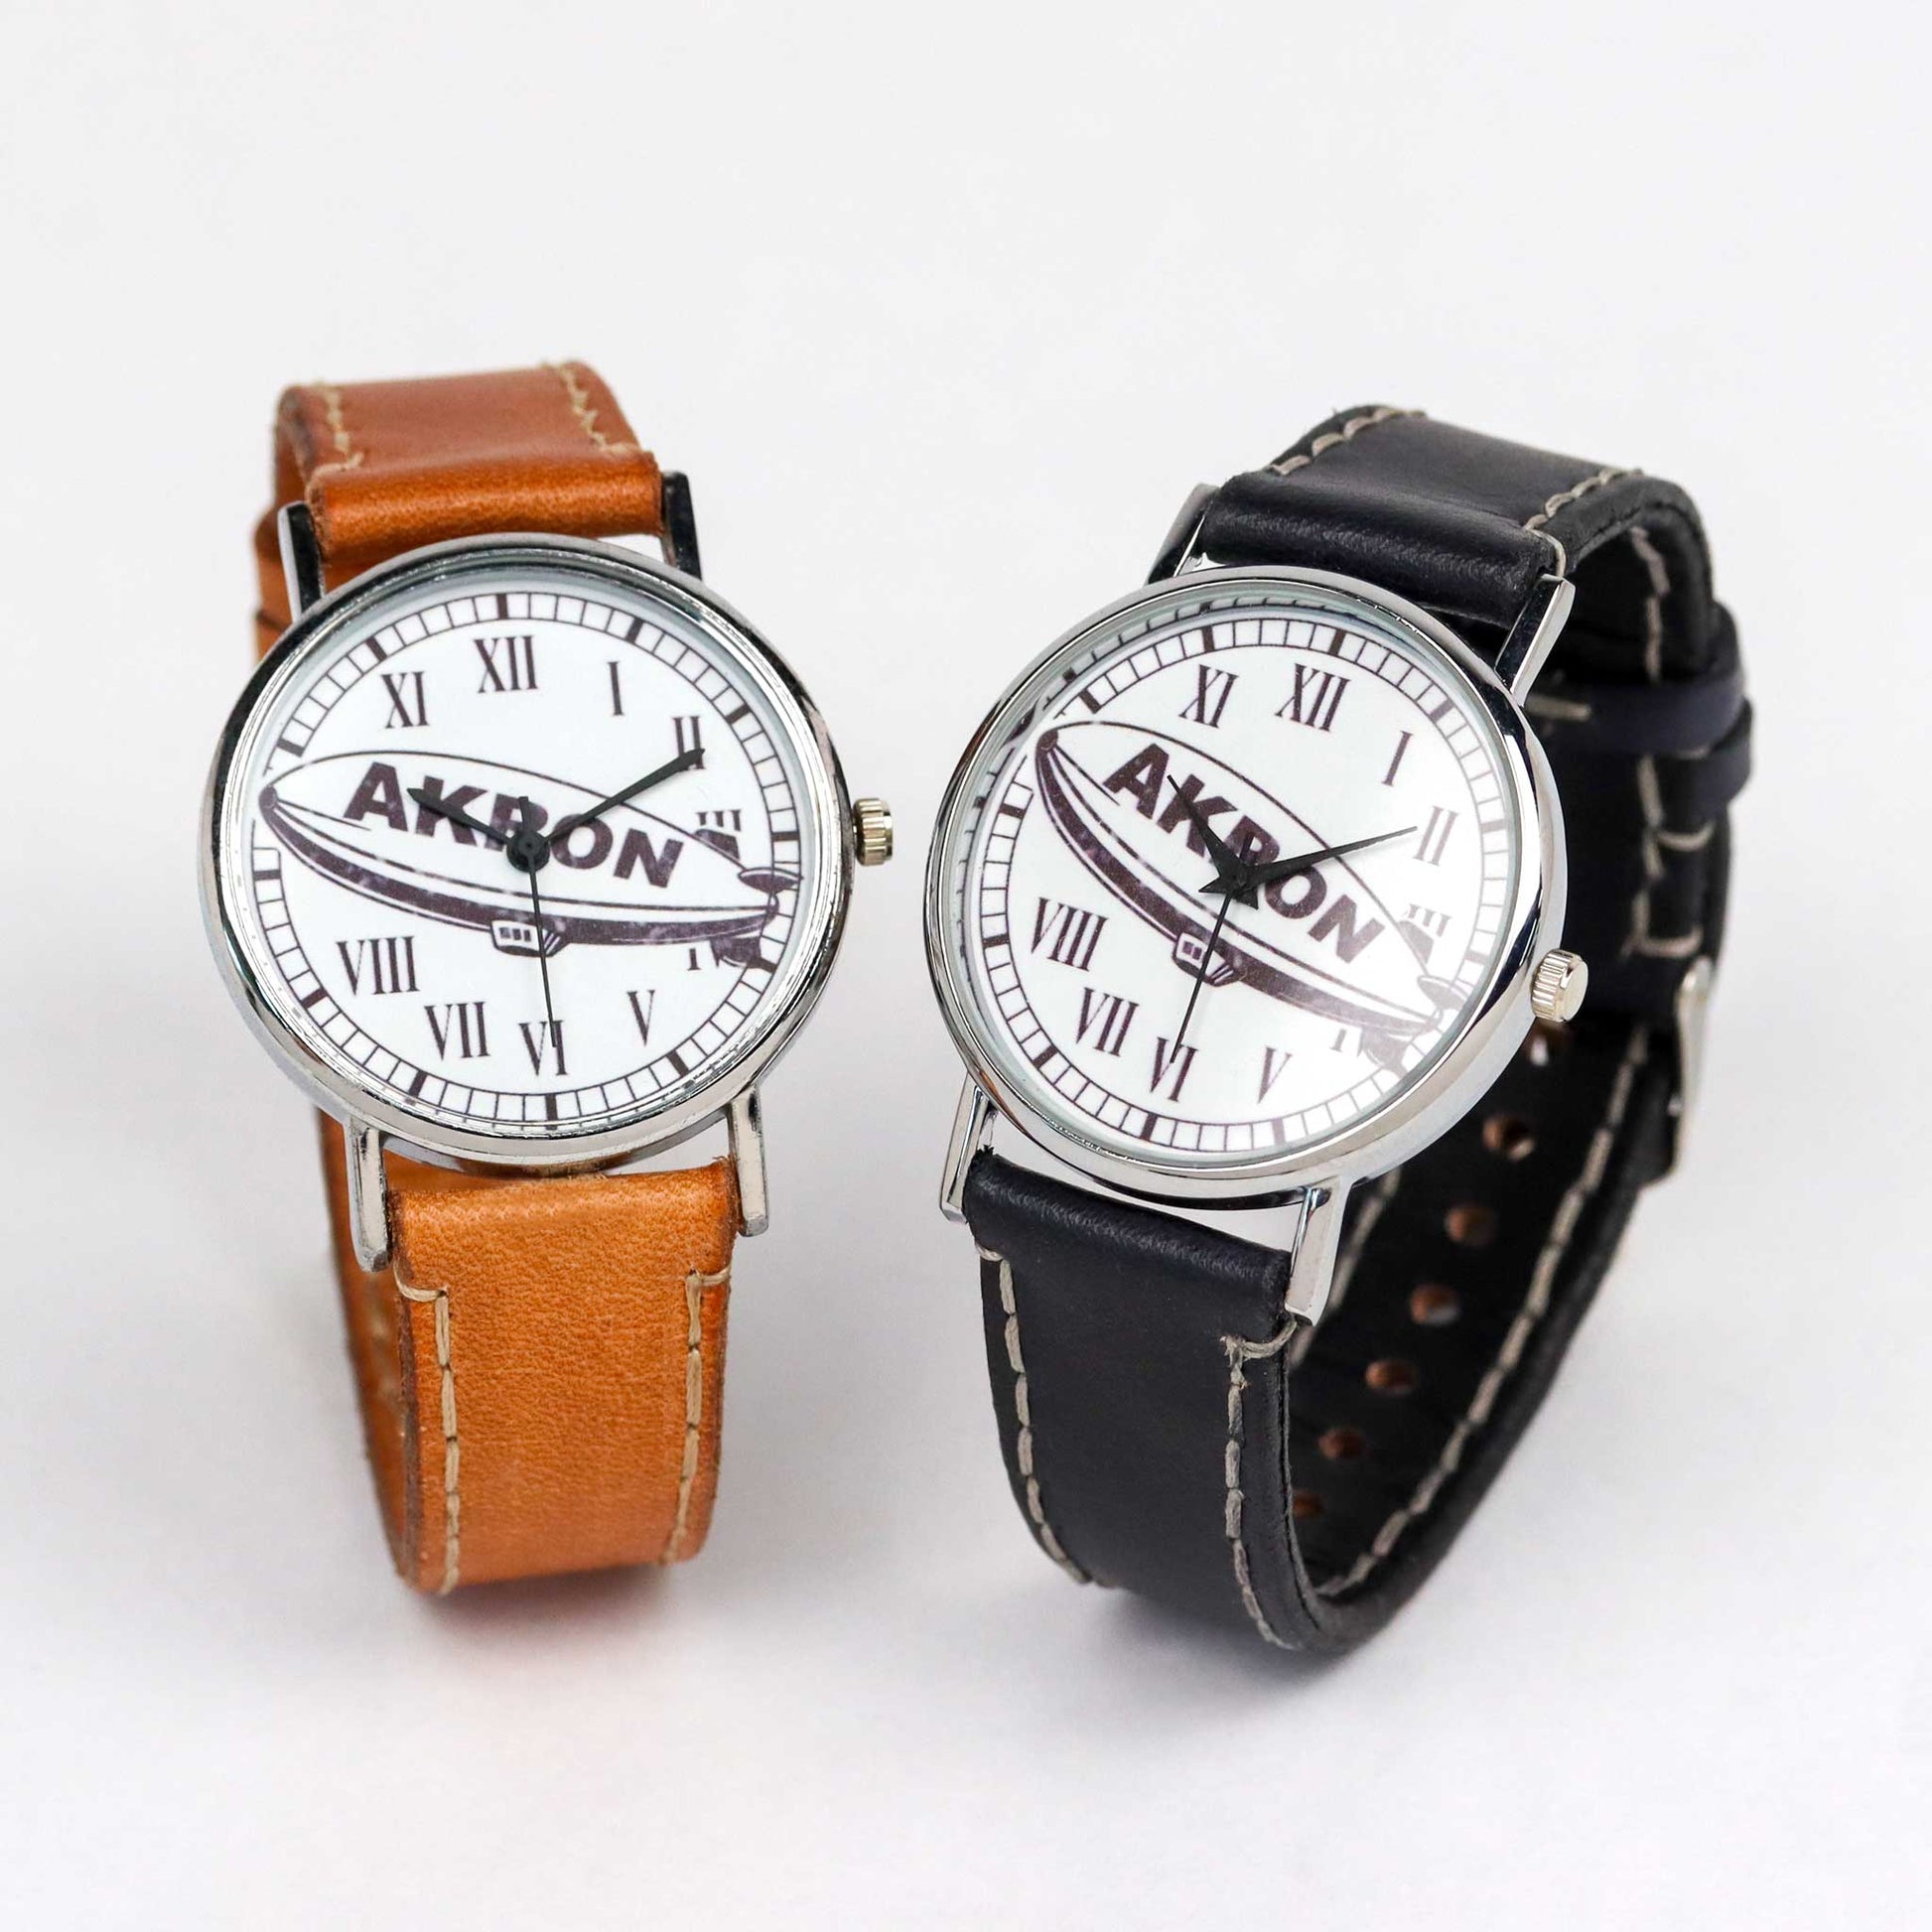 wrist watches with a blimp and akron on the dial